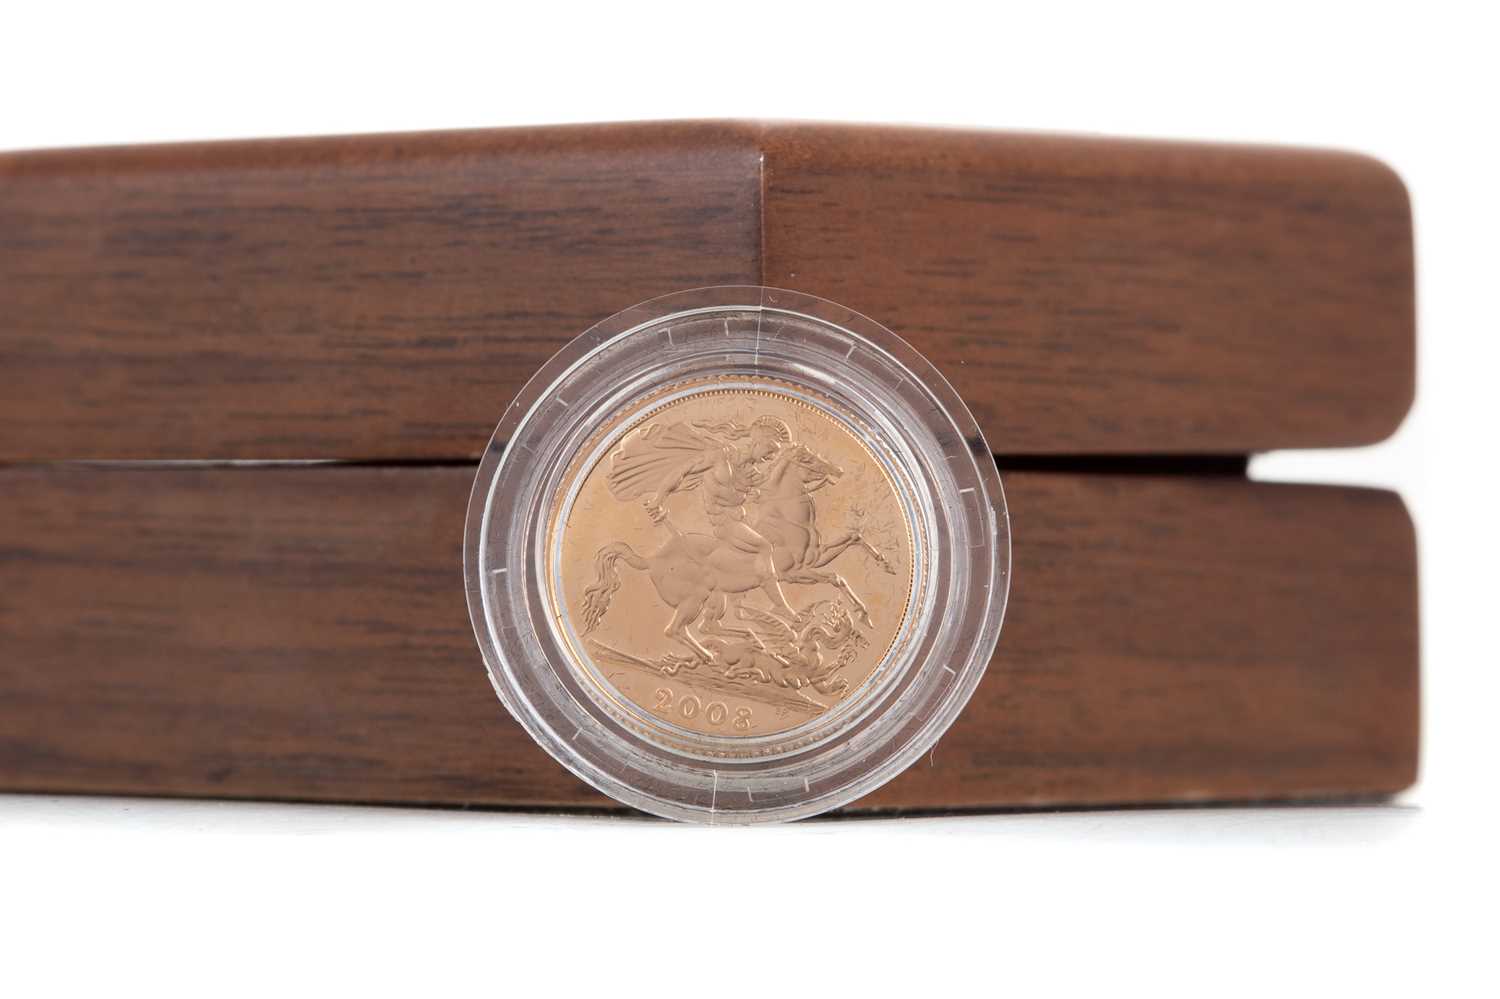 AN ELIZABETH II GOLD PROOF SOVEREIGN DATED 2008